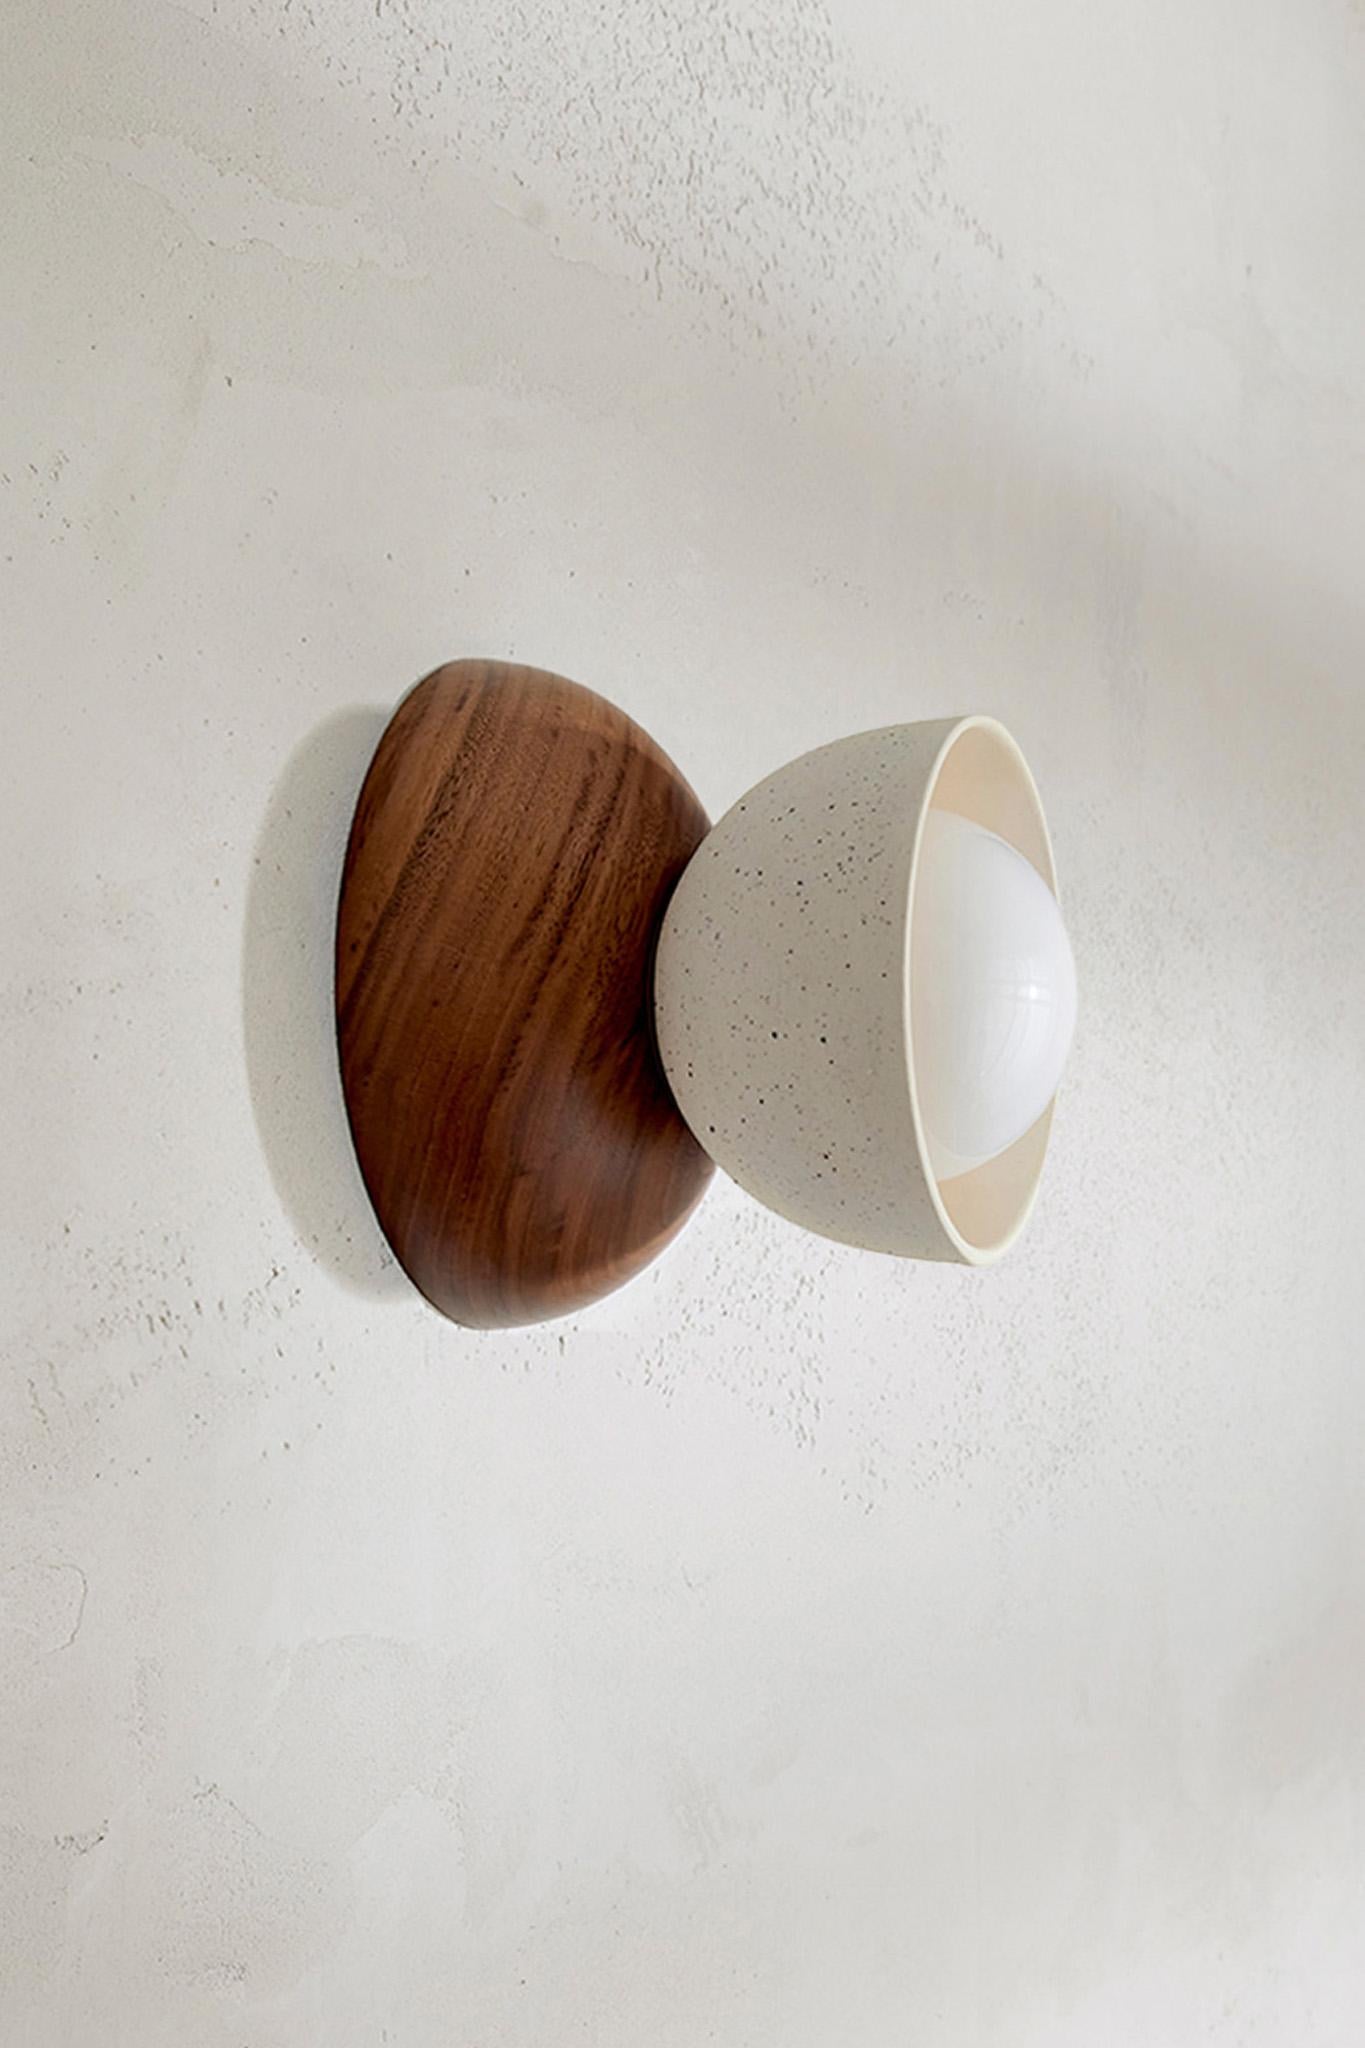 Crafted with a combination of two contrasting half domes, the Terra 00 Surface Sconce is made up of a slip-cast ceramic shade, paired with hand-turned FSC-certified timbers, making a modern form that brings two elements together. Each of the ceramic